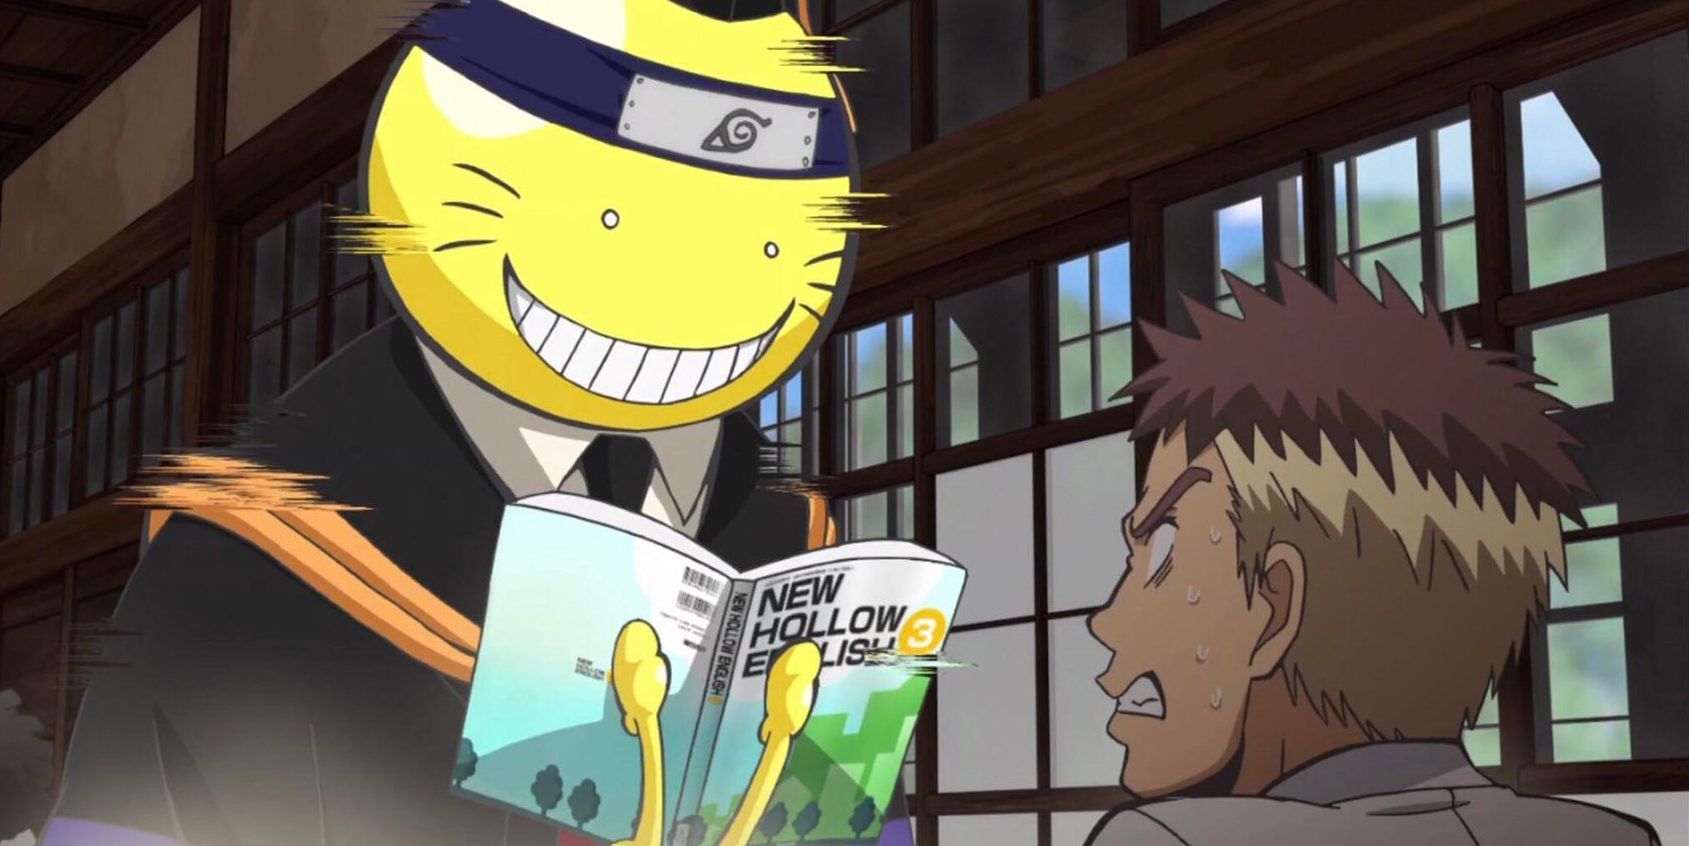 The Valuable Lessons of Assassination Classroom - I drink and